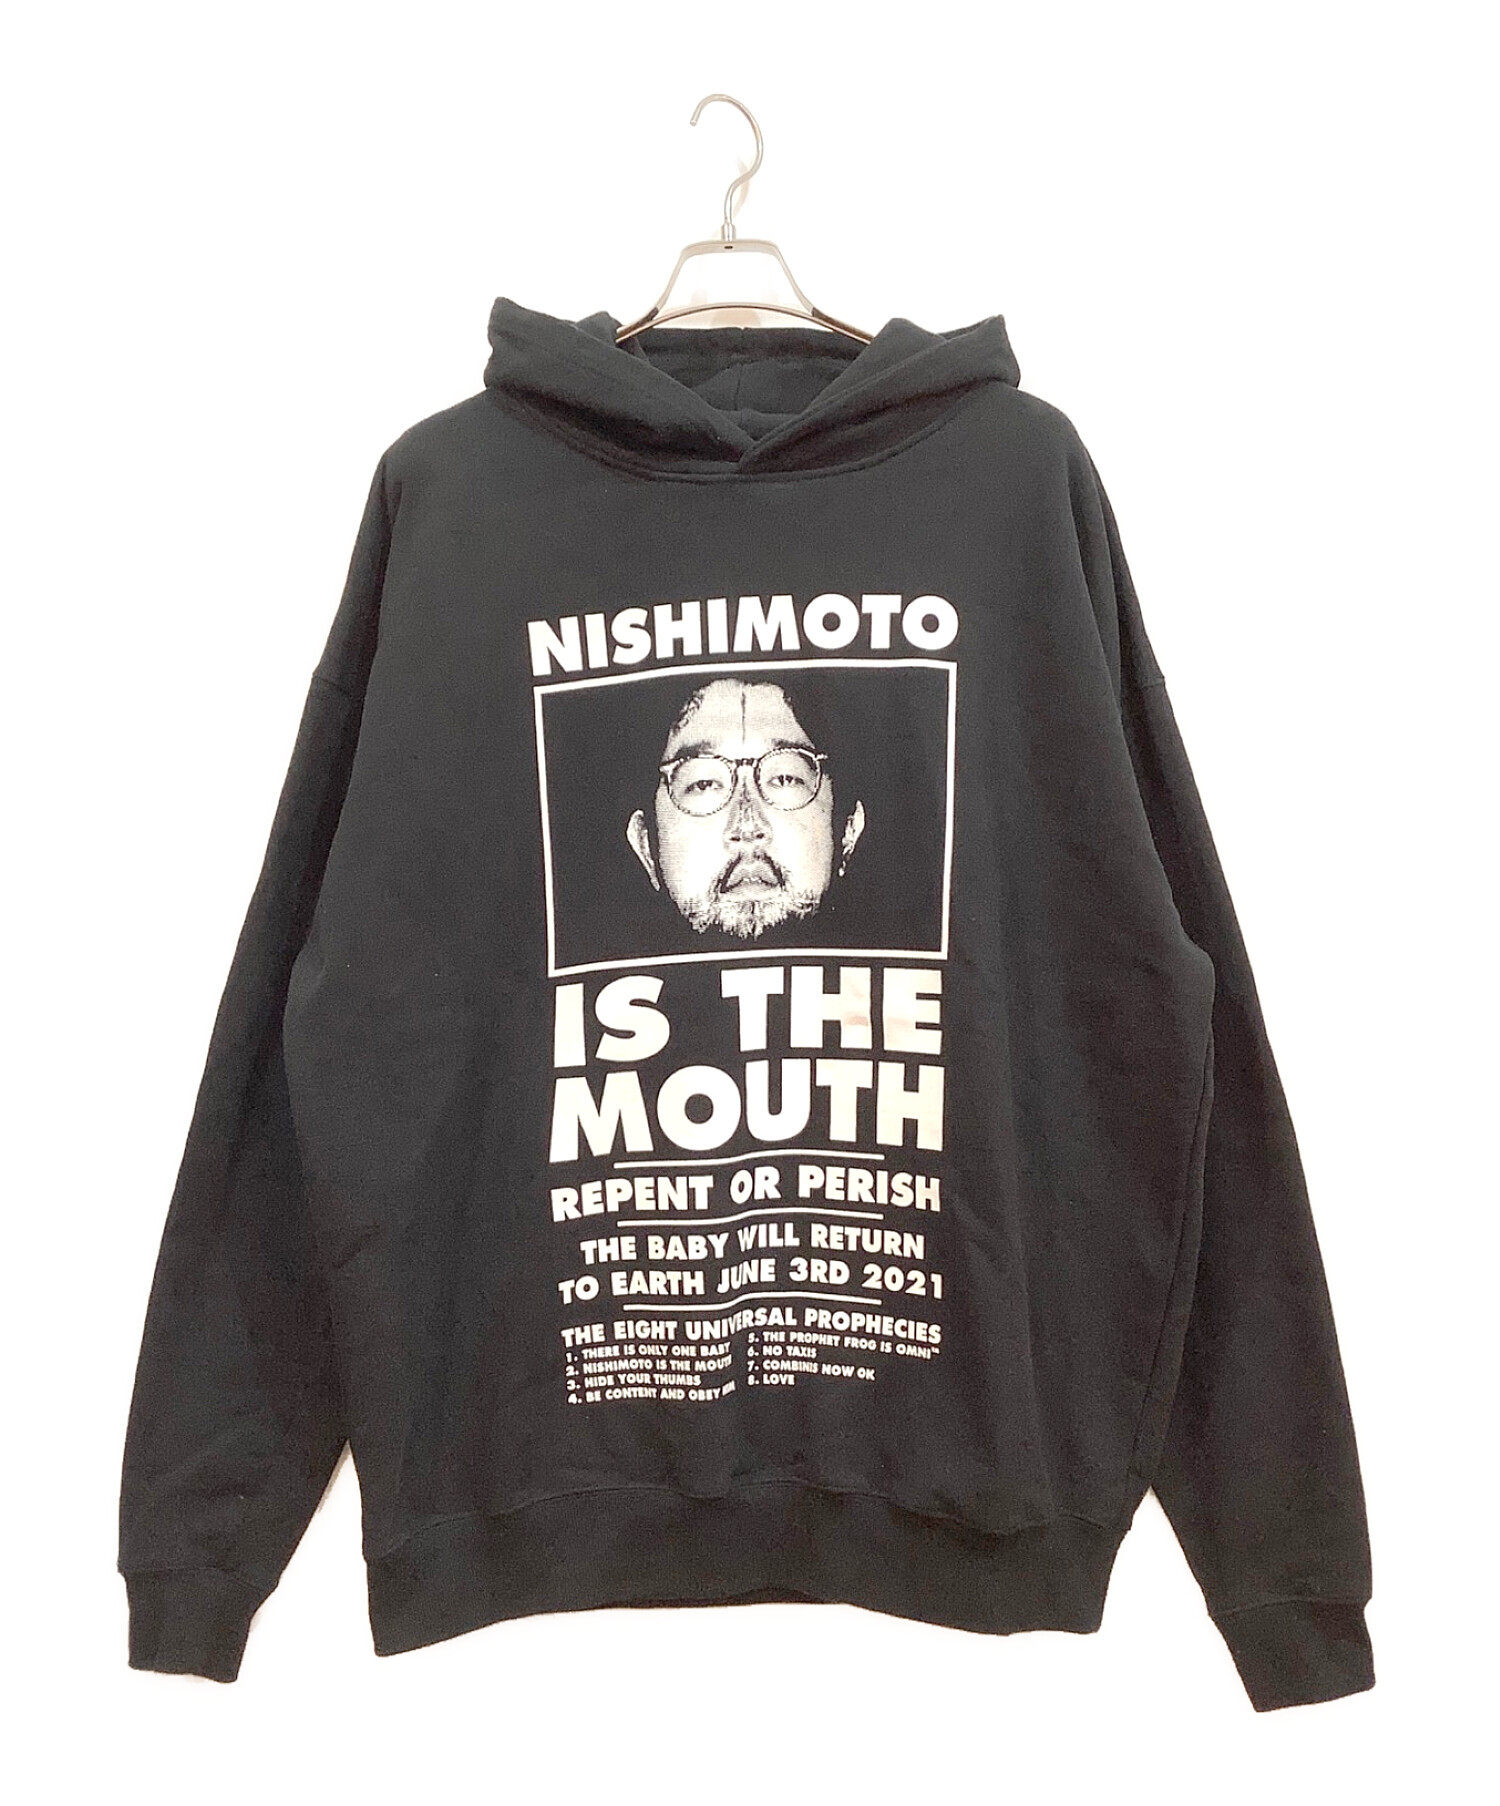 NISHIMOTO IS THE MOUTH パーカー　XL